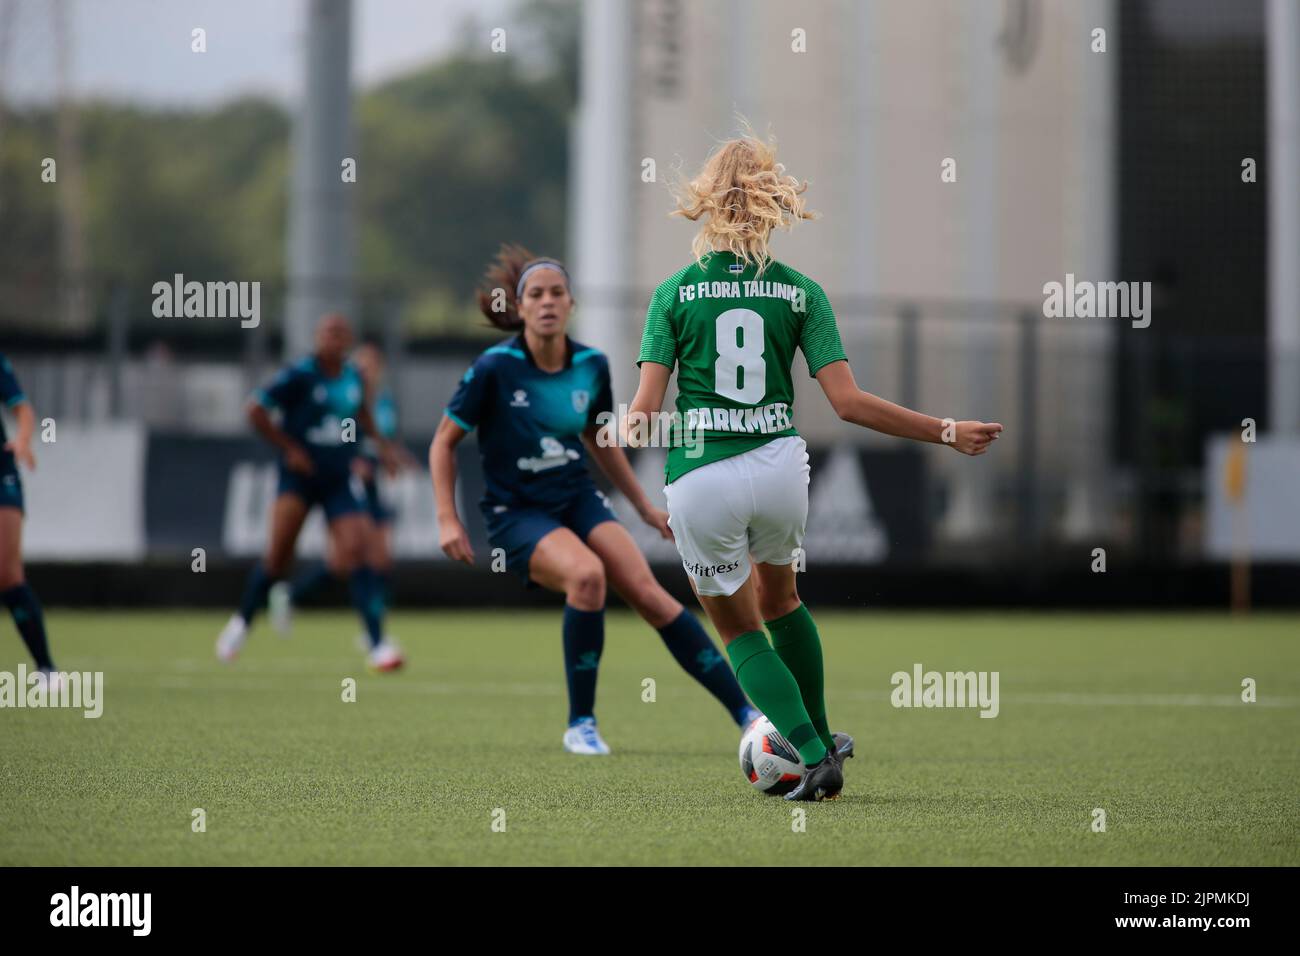 Vinovo, Italy. 18th Aug, 2022. Heliana Tarkmeel of Tallinna Fc Flora during the match Tallin Fc Flora and Fc qiryat of the first qualifying round of the Uefa Womenâ&#x80;&#x99;s Champions League on August 18, 2022 at Juventus Training Ground, Turin, Italy. Photo Nderim Kaceli Credit: Independent Photo Agency/Alamy Live News Stock Photo